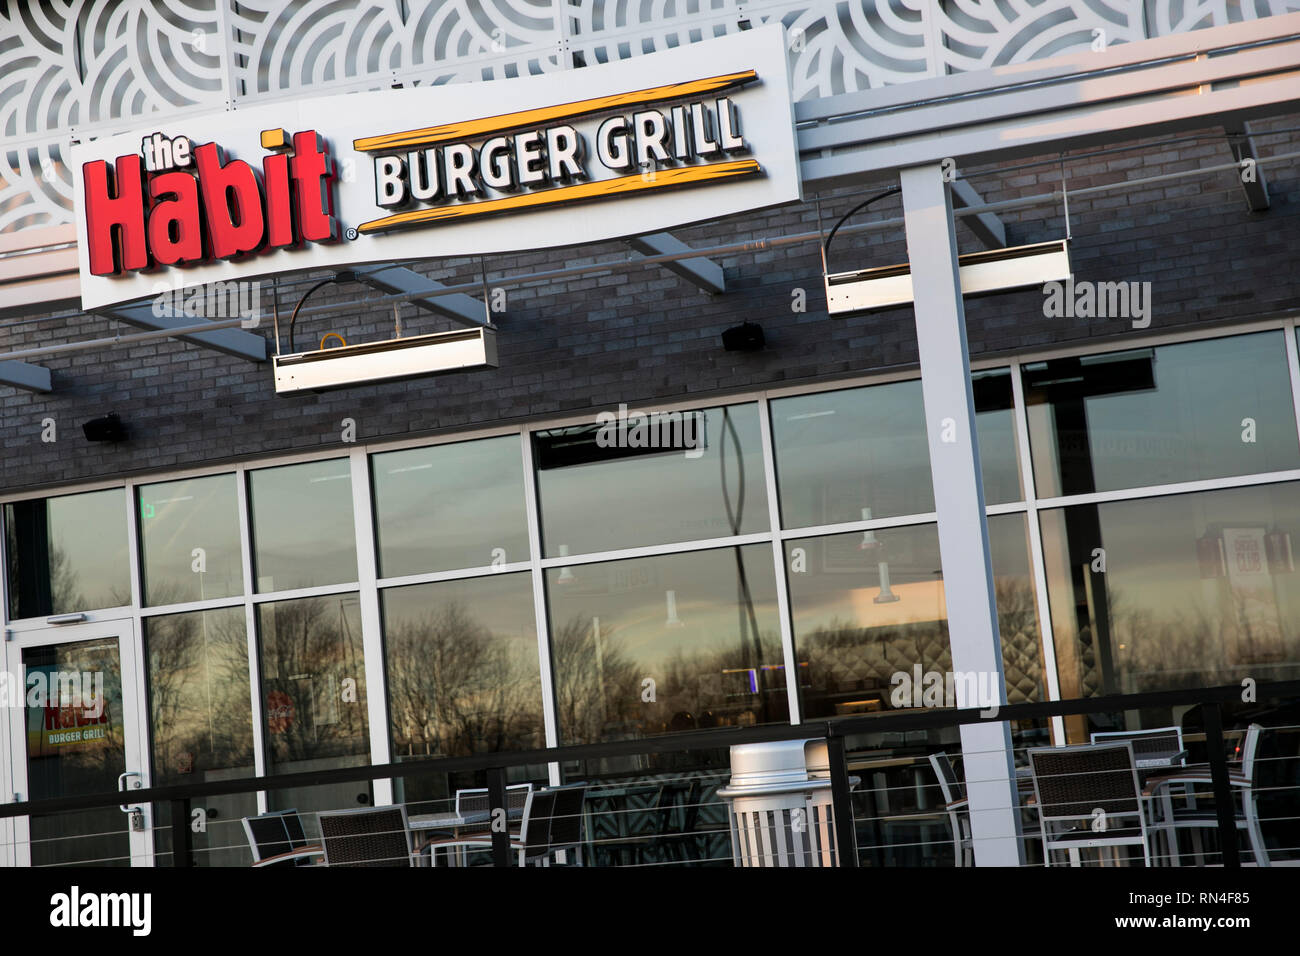 A logo sign outside of a The Habit Burger Grill restaurant location in Chantilly, Virginia on February 14, 2019 Stock Photo